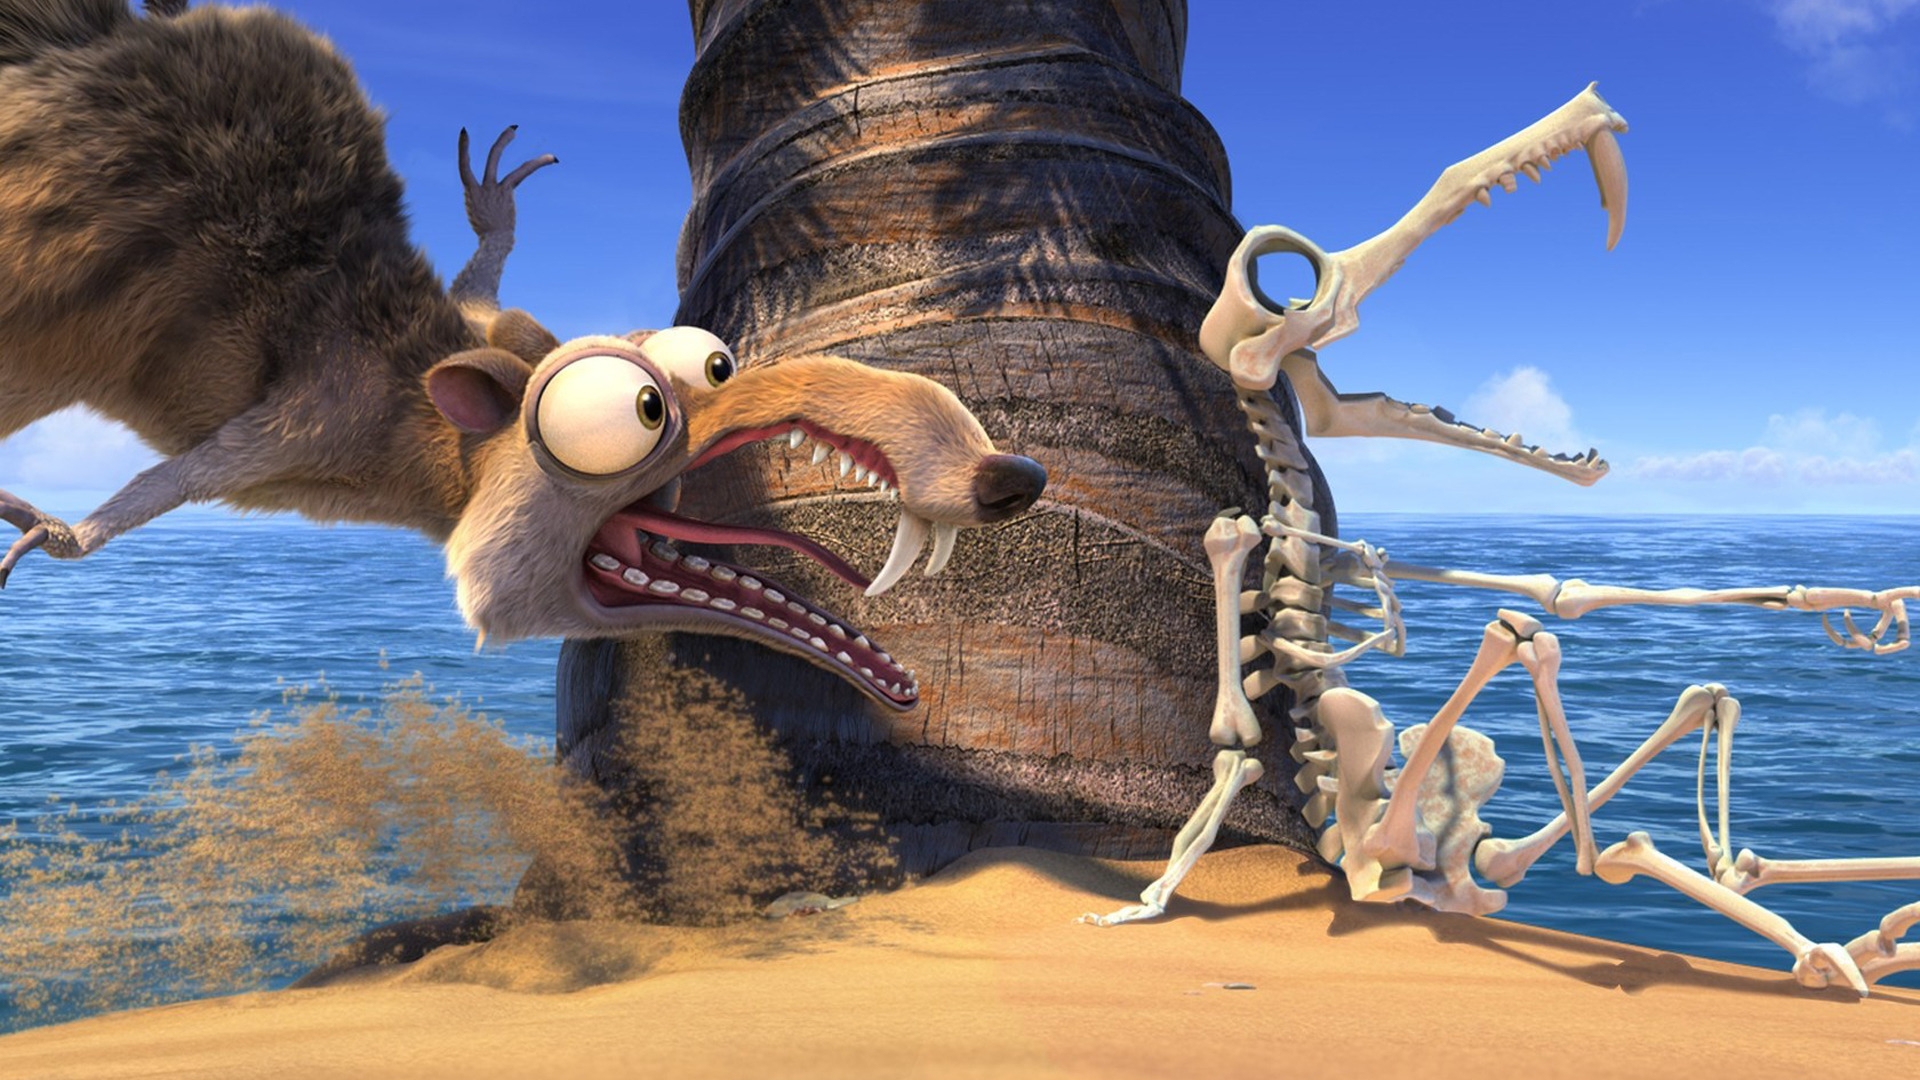 Scrat and Skeleton for 1920 x 1080 HDTV 1080p resolution